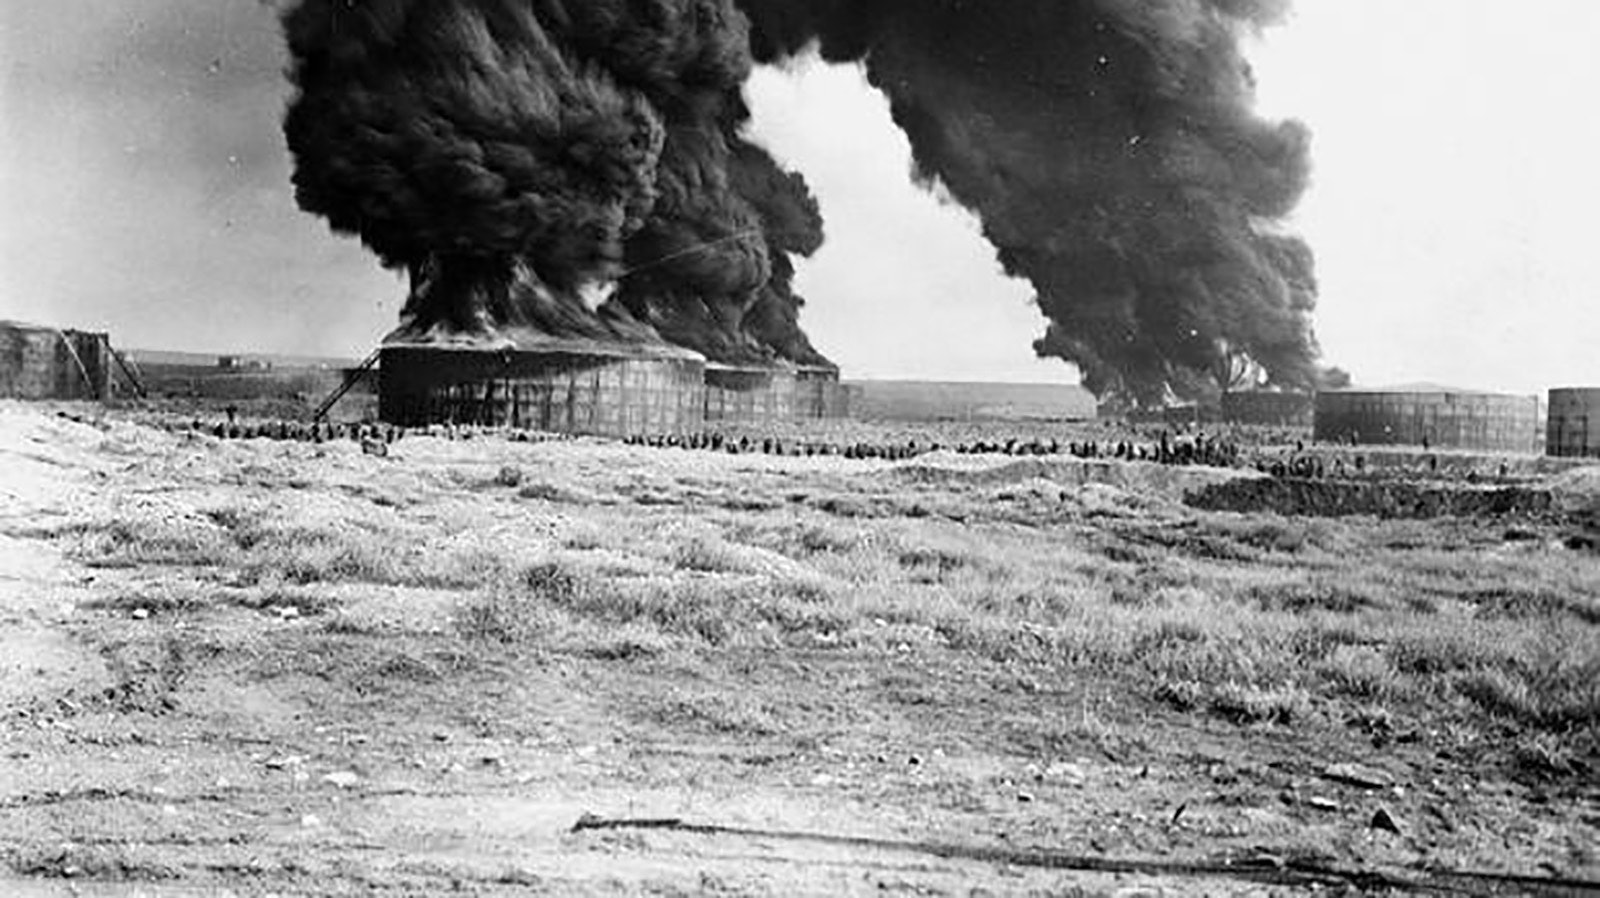 Hundreds of men were involved in the efforts to keep the oil tank fires from spreading and causing further economic loss to the oil company.